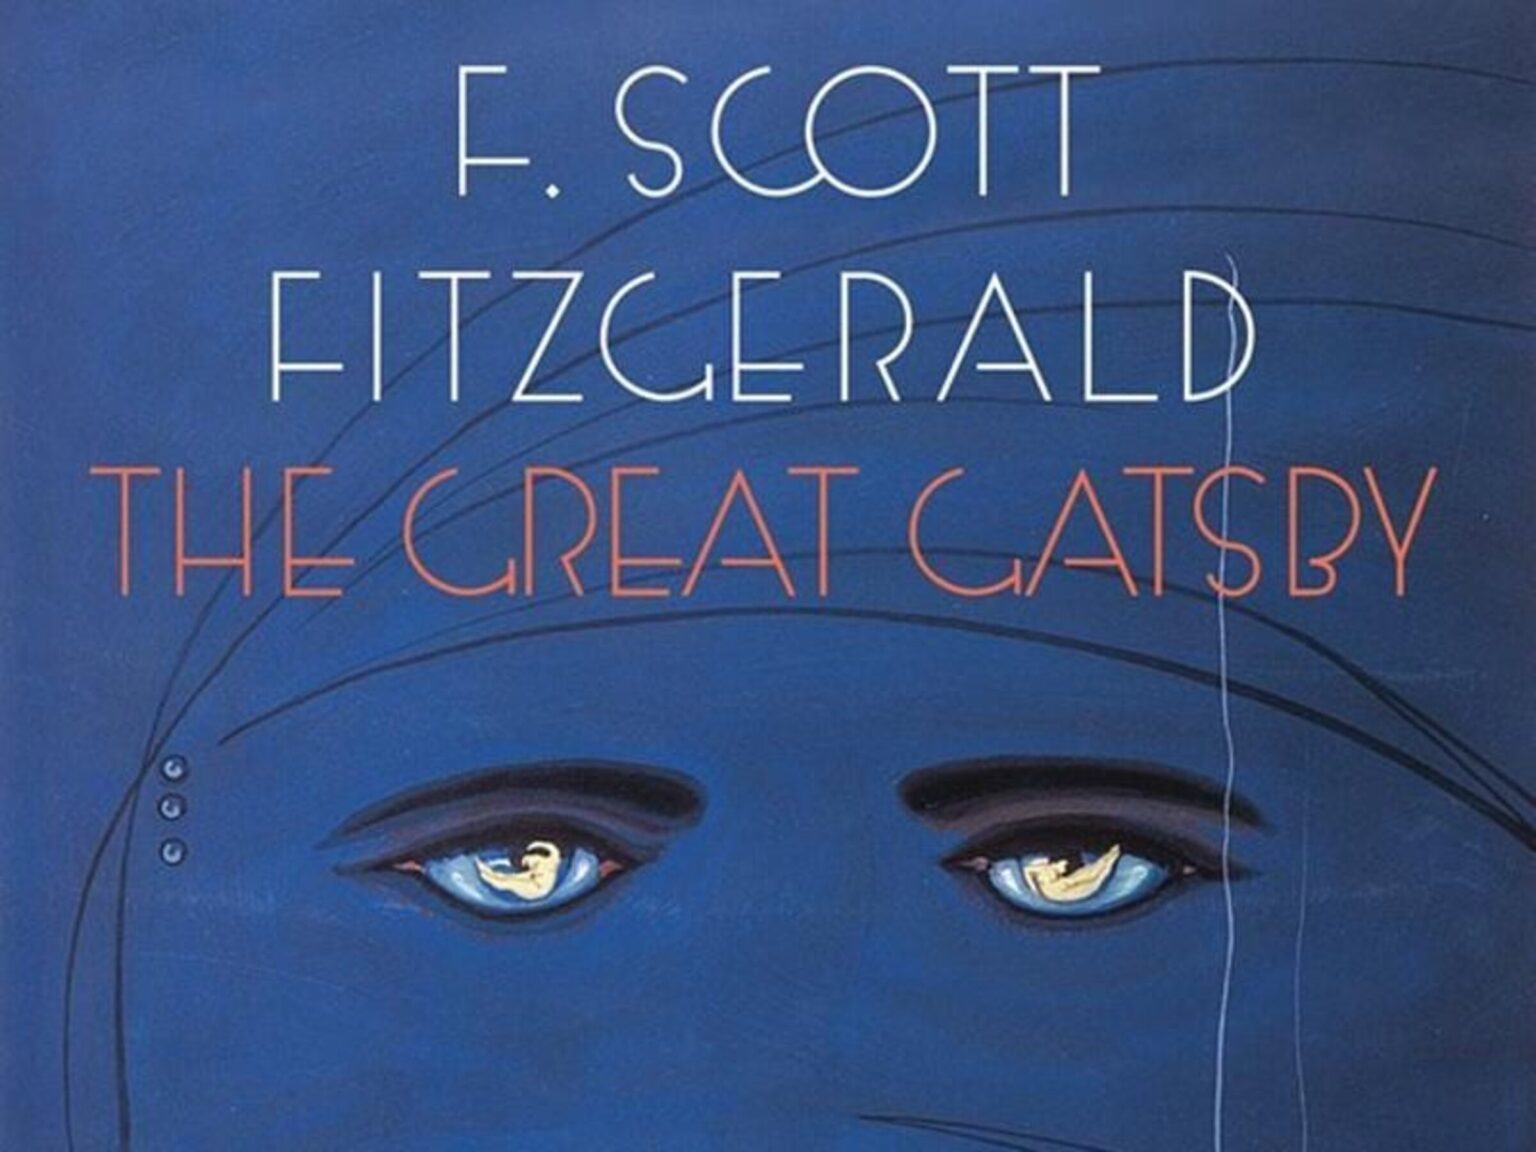 The 'Great Gatsby' is cherished throughout many generations. And its movies are no exception! Add these titles to your list then tell us your favorite.